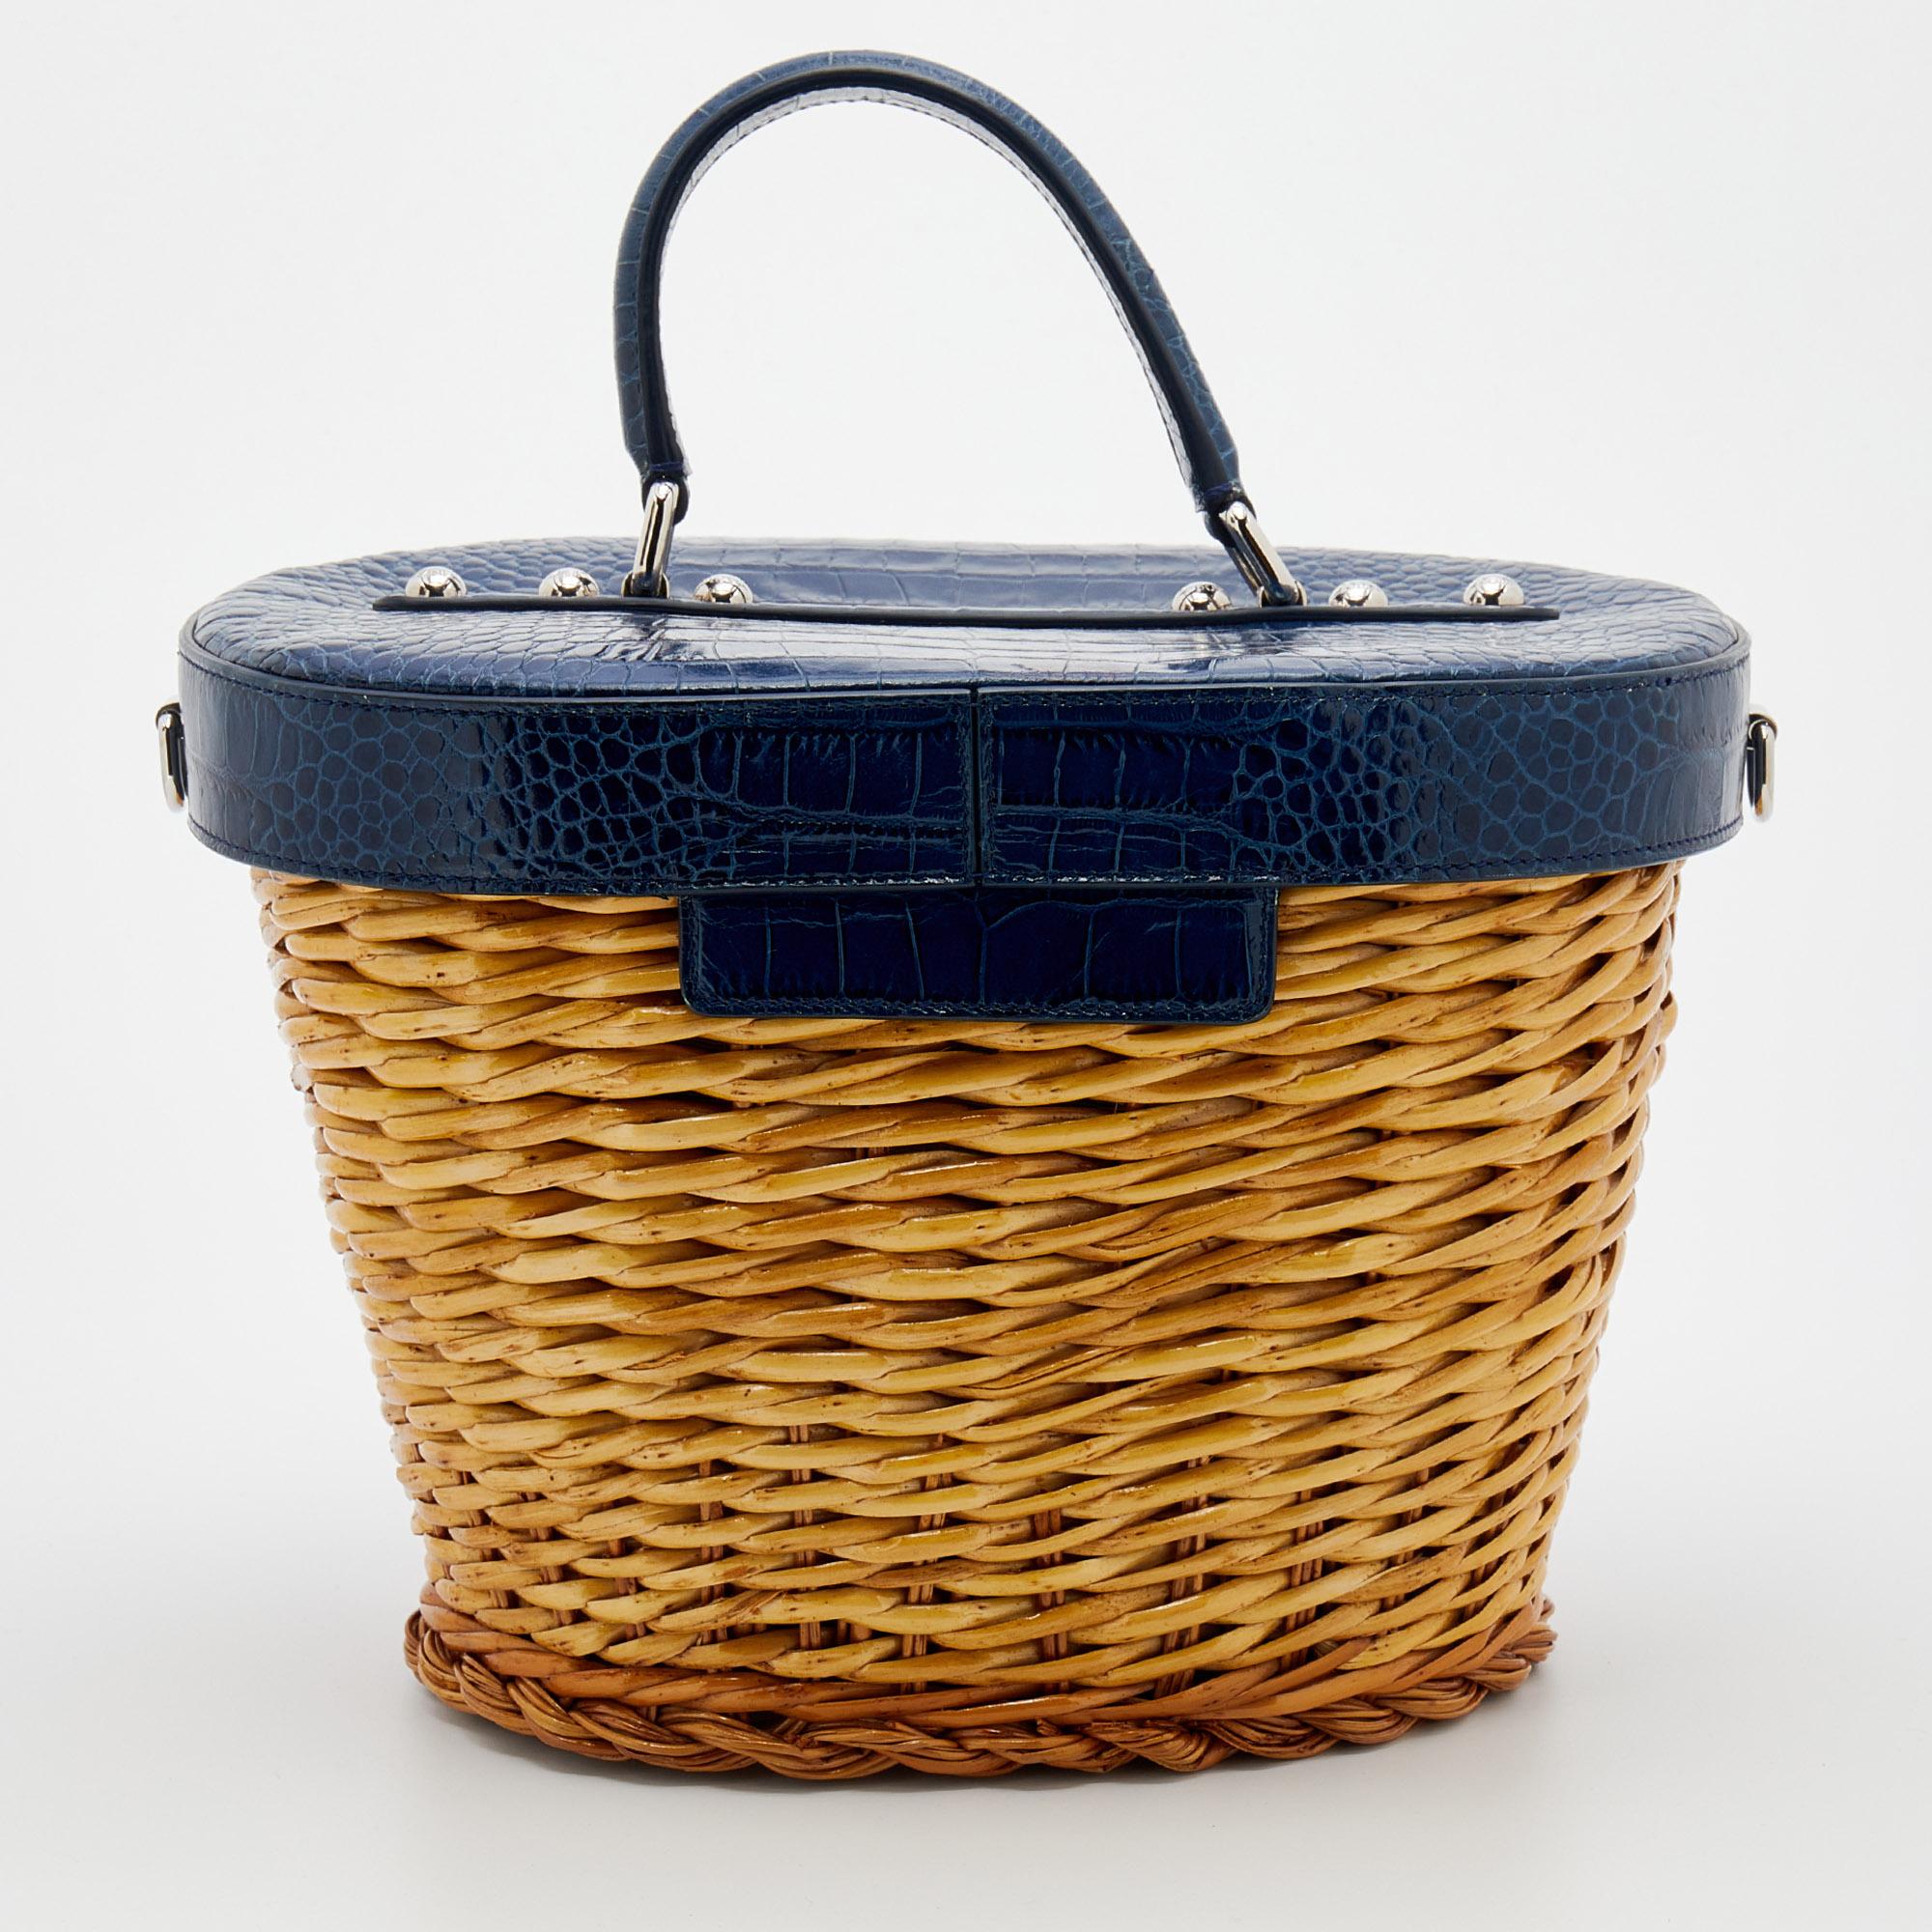 Dolce & Gabbana's regard for exquisite details and Italian tradition is beautifully showcased in this wicker bag. Crafted from straw and embossed leather, it embodies a fresh and contemporary vibe. It is added with a short handle at the top and a